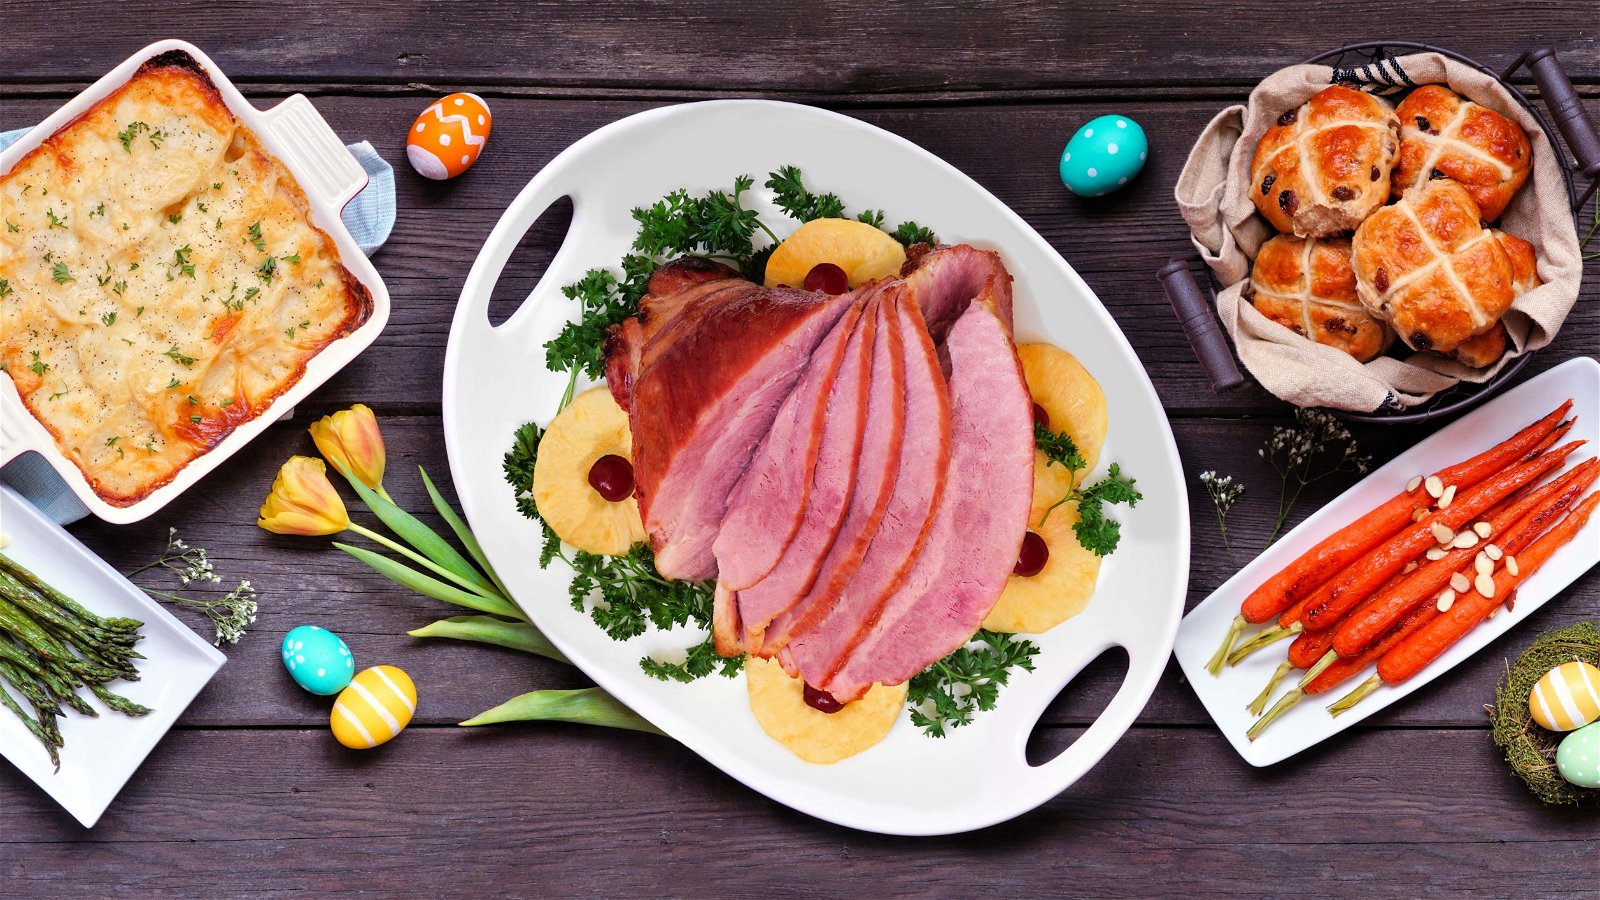 Subscribe and use code FREEHAM at checkout to claim your free Easter Ham!